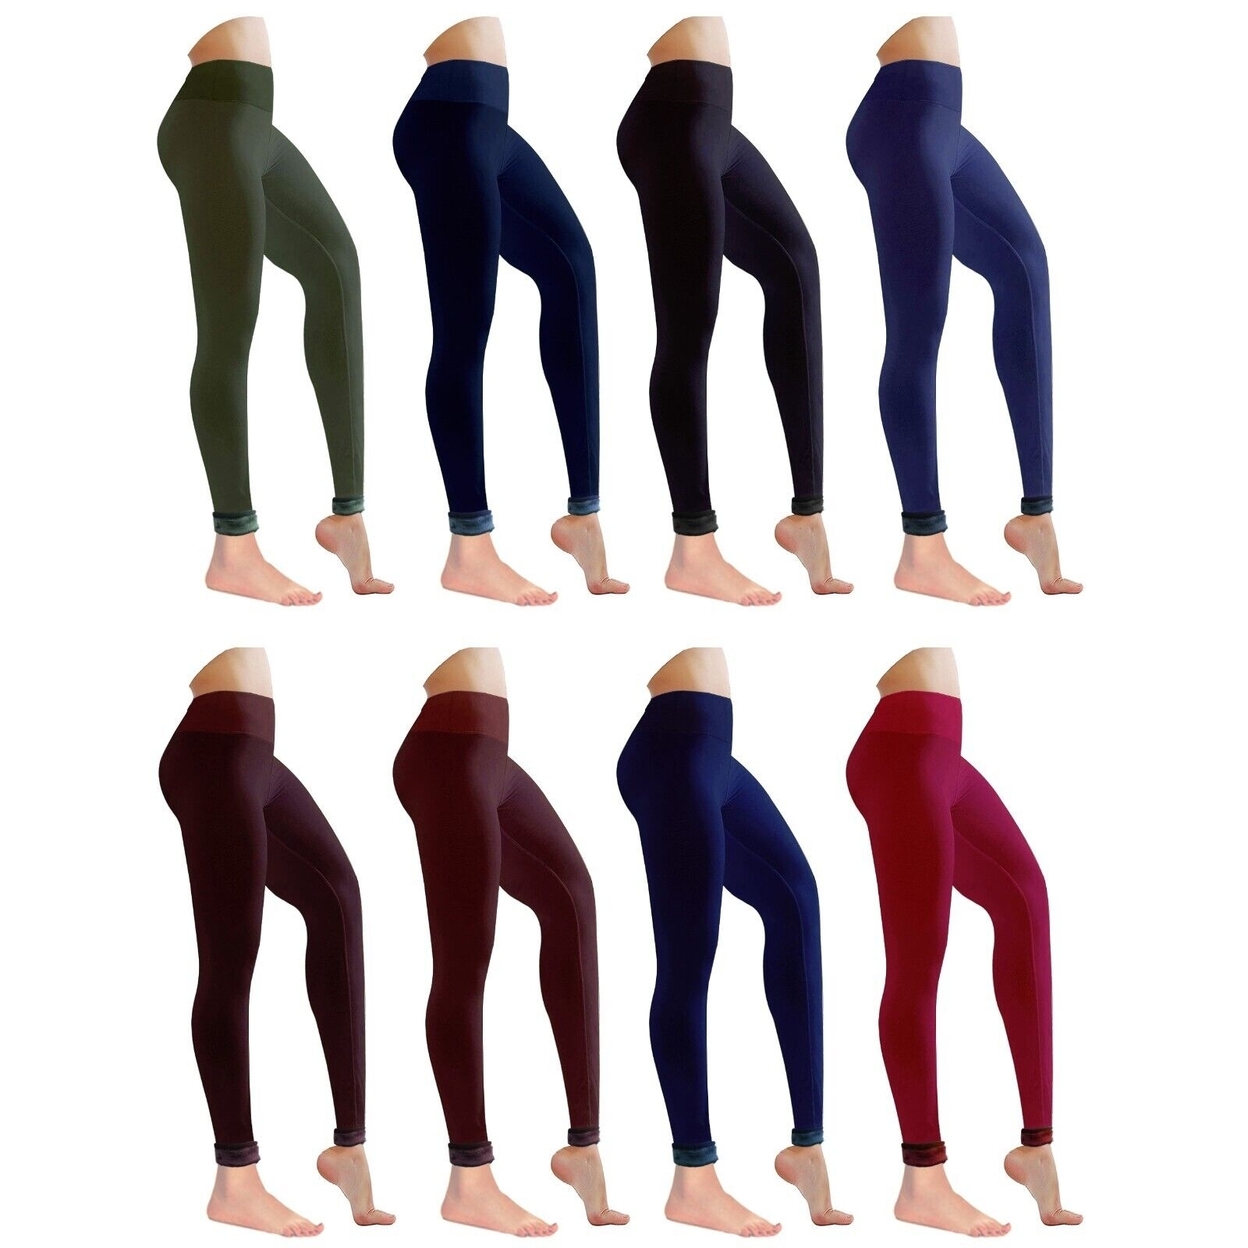 4-Pack: Women's Winter Warm Ultra Soft Cozy Fur Lined Leggings - Assorted, Xx-large